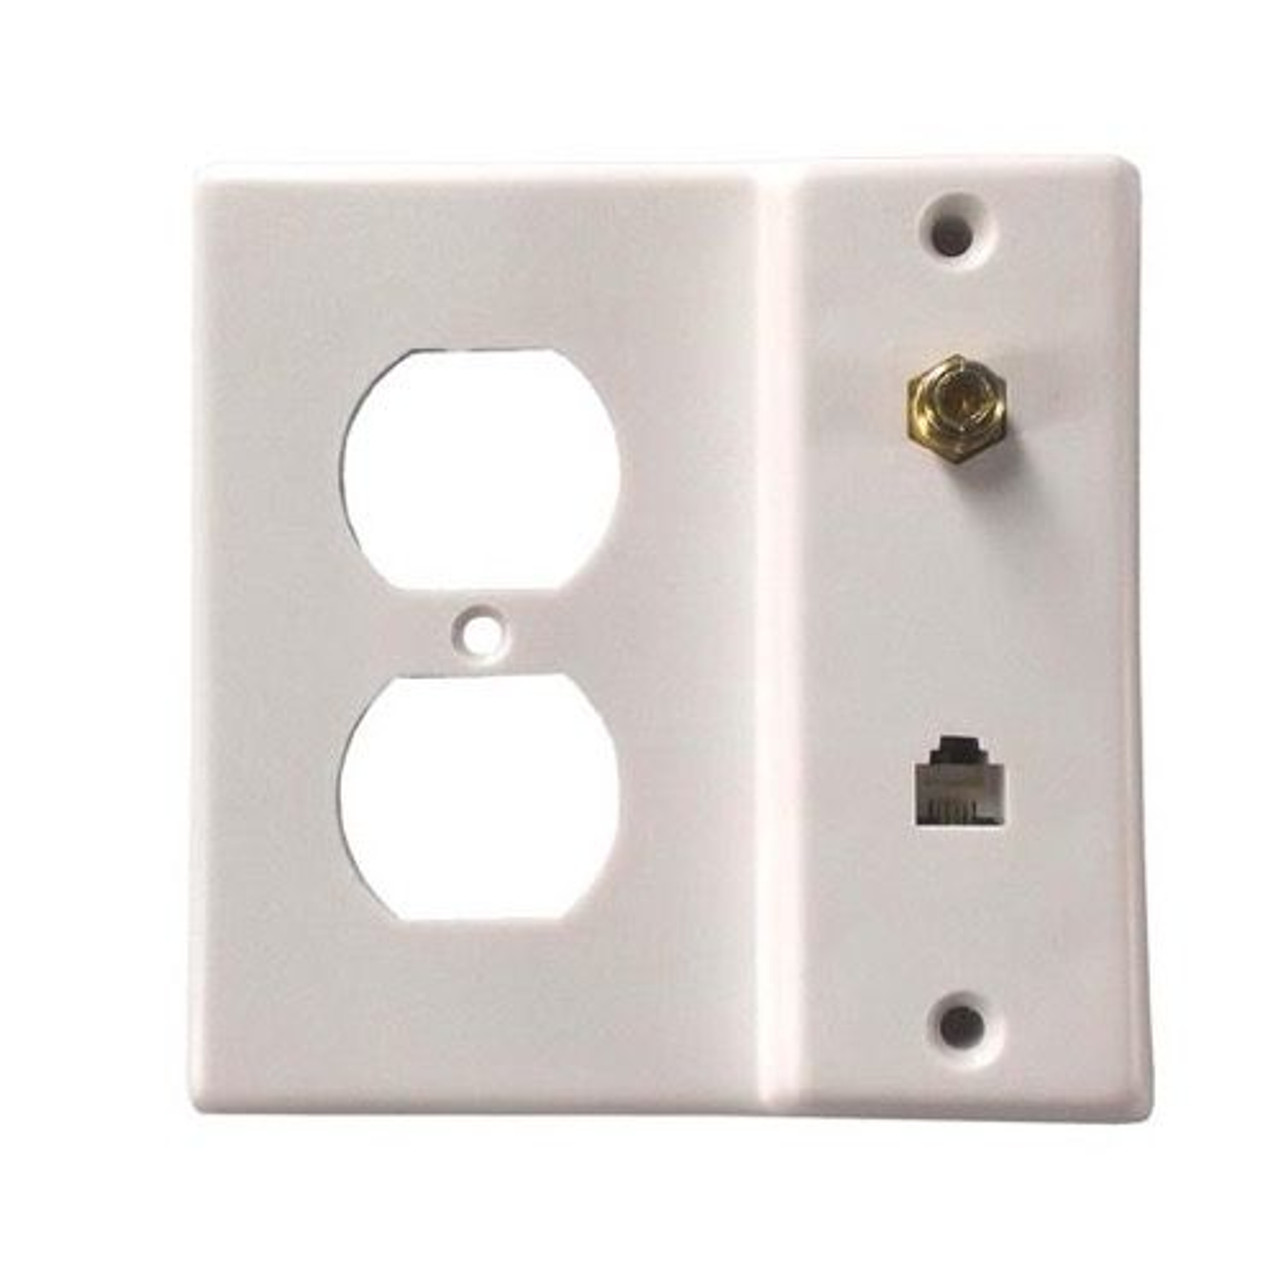 Eagle Wall Plate F Jack Telephone RJ11 Duplex Receptacle Combo White Outlet Coaxial F-81 Modular AC RG59 Coax Telephone  Phone Electrical Outlet Plate Plug Coax Cable